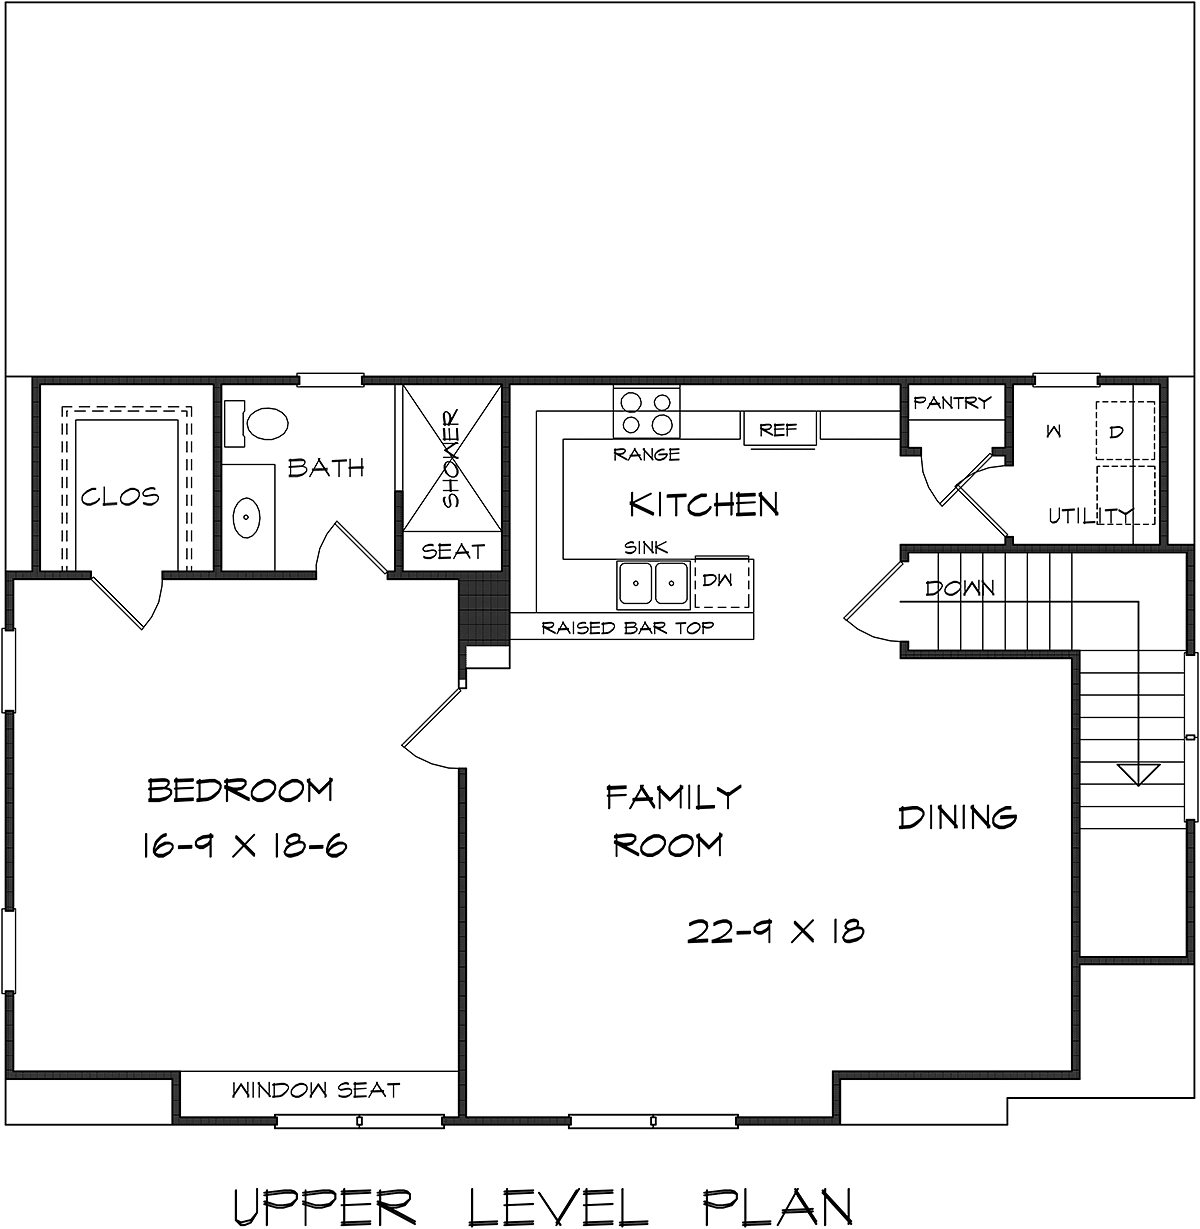 Traditional Garage-Living Plan 76708 with 1 Bed, 1 Bath, 3 Car Garage Level Two